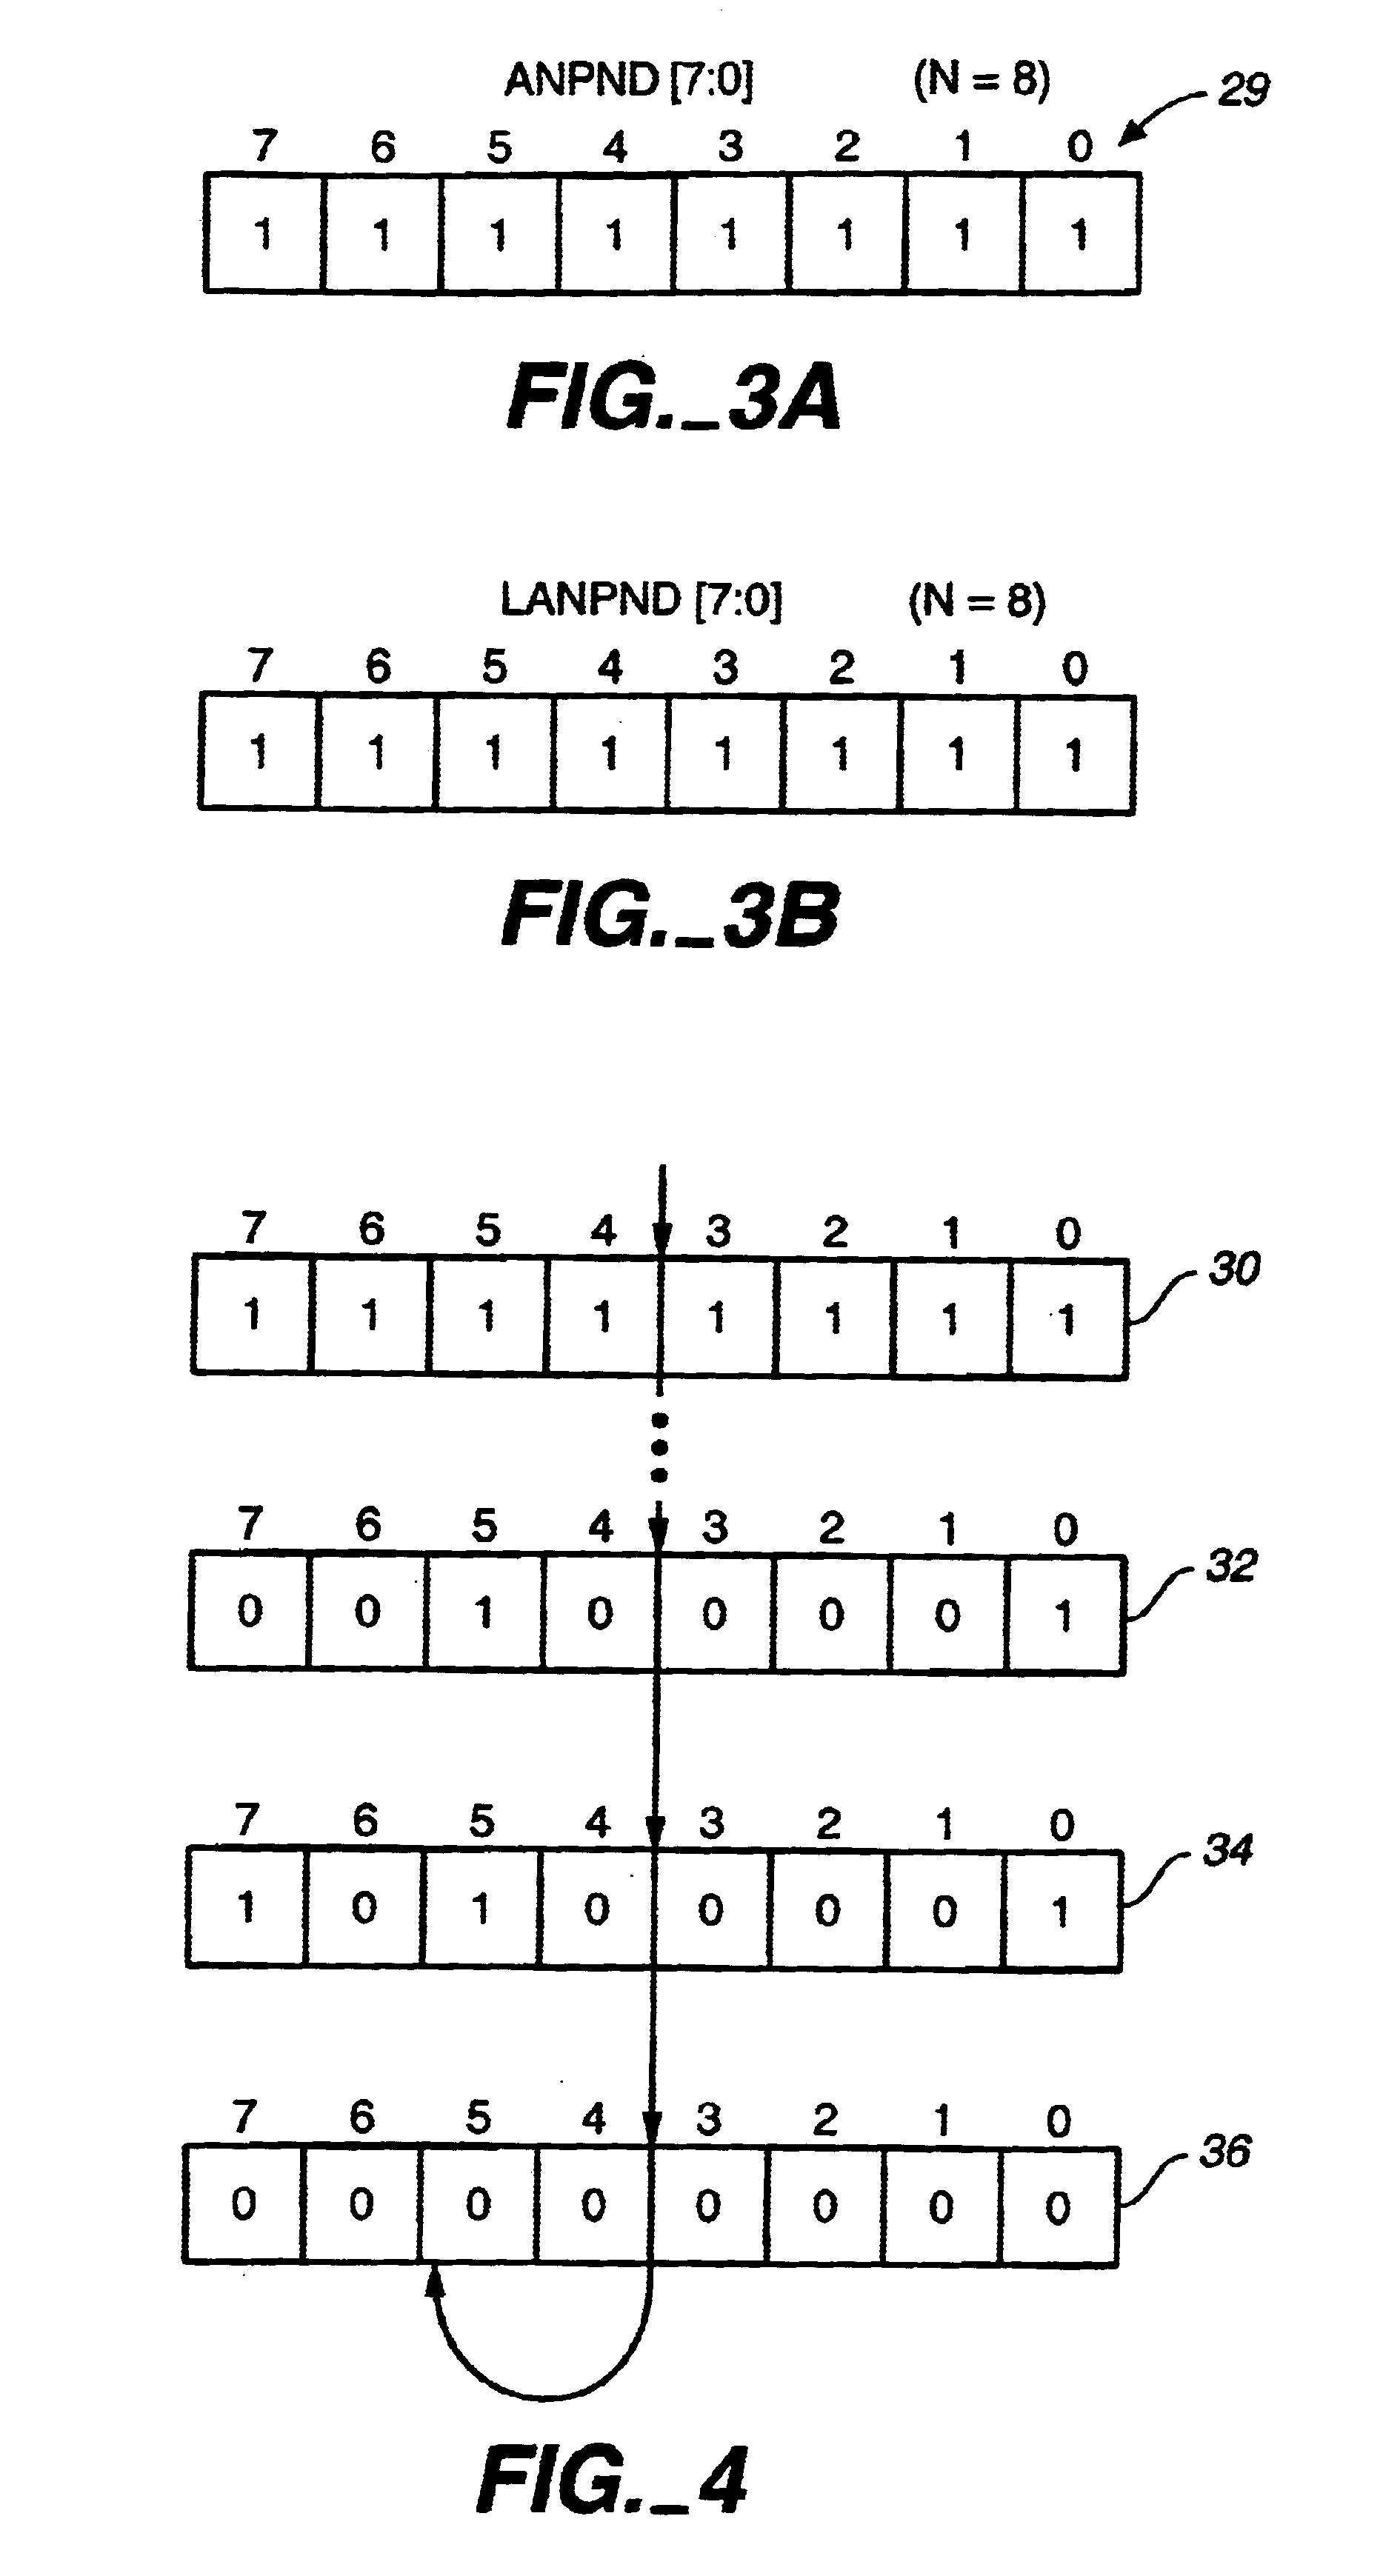 Method for autonegotiating multiple devices with a shared autonegotiation controller